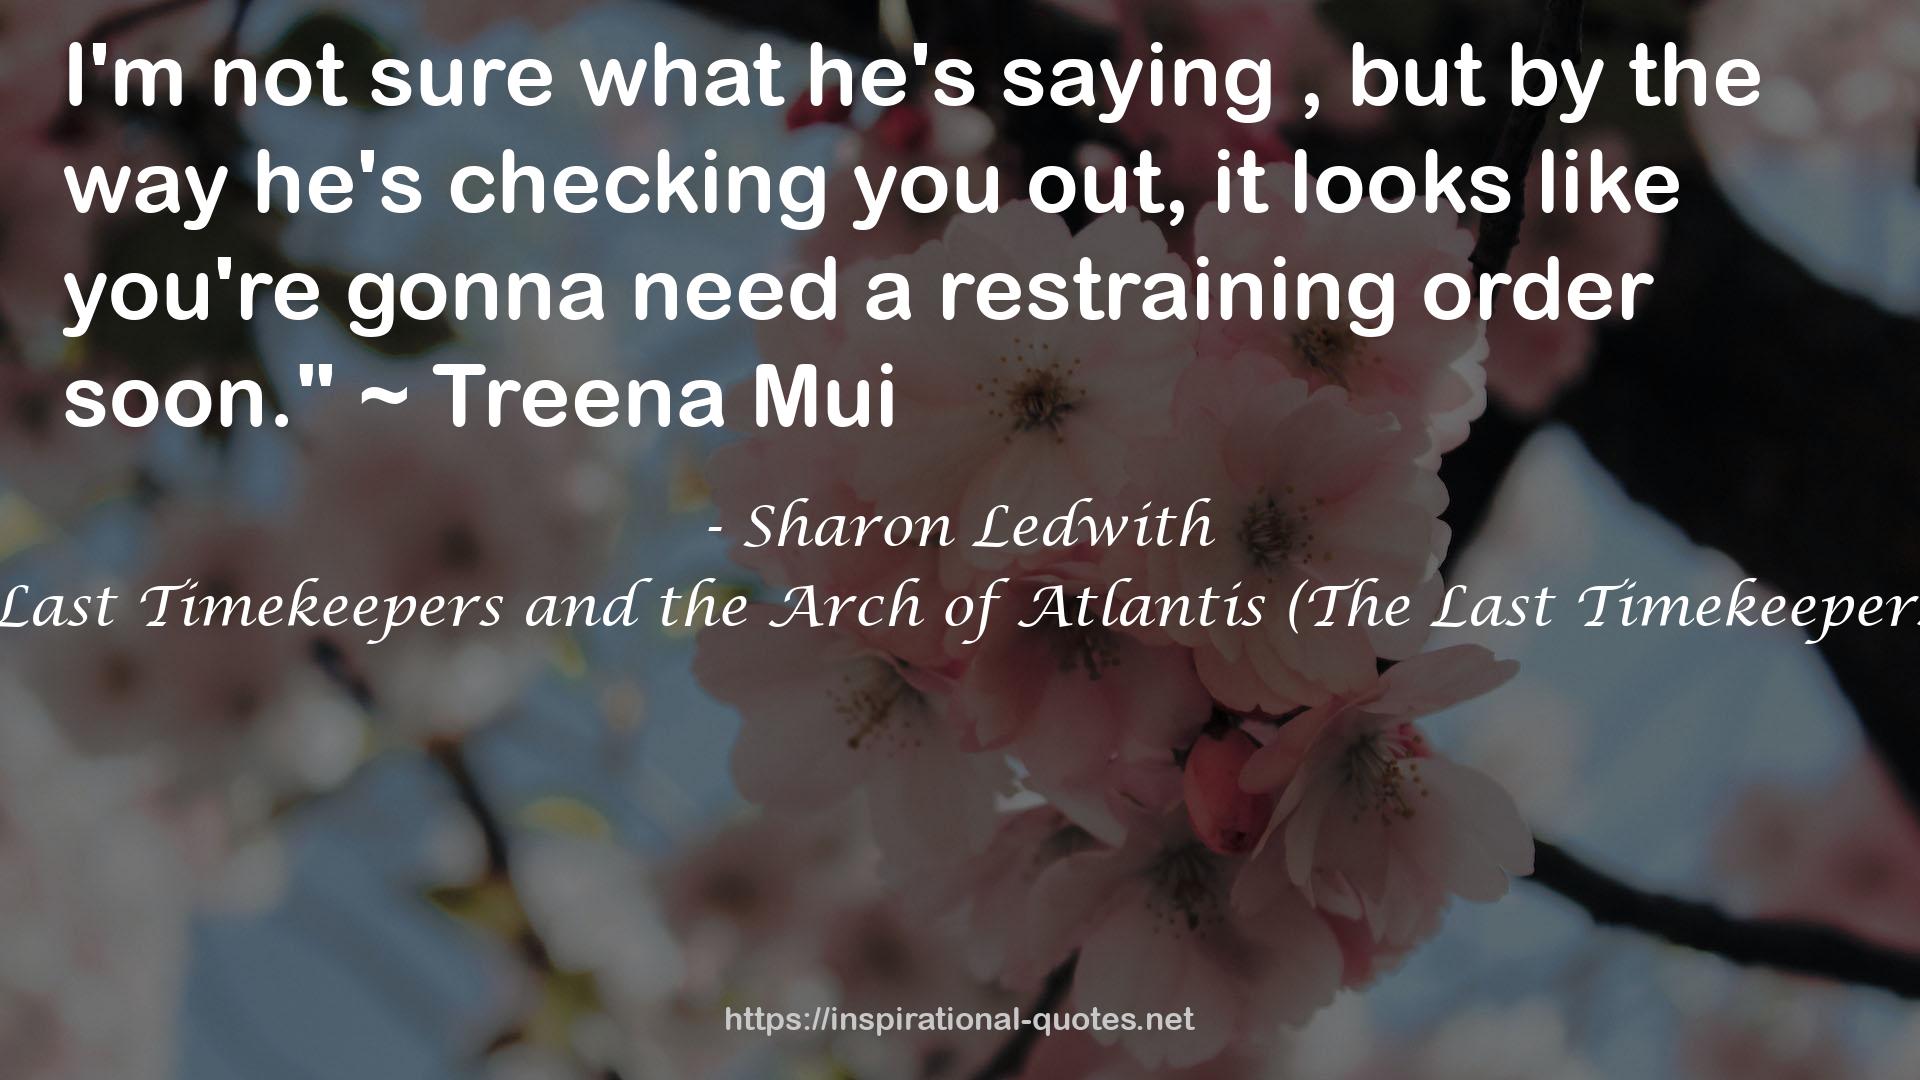 Sharon Ledwith QUOTES